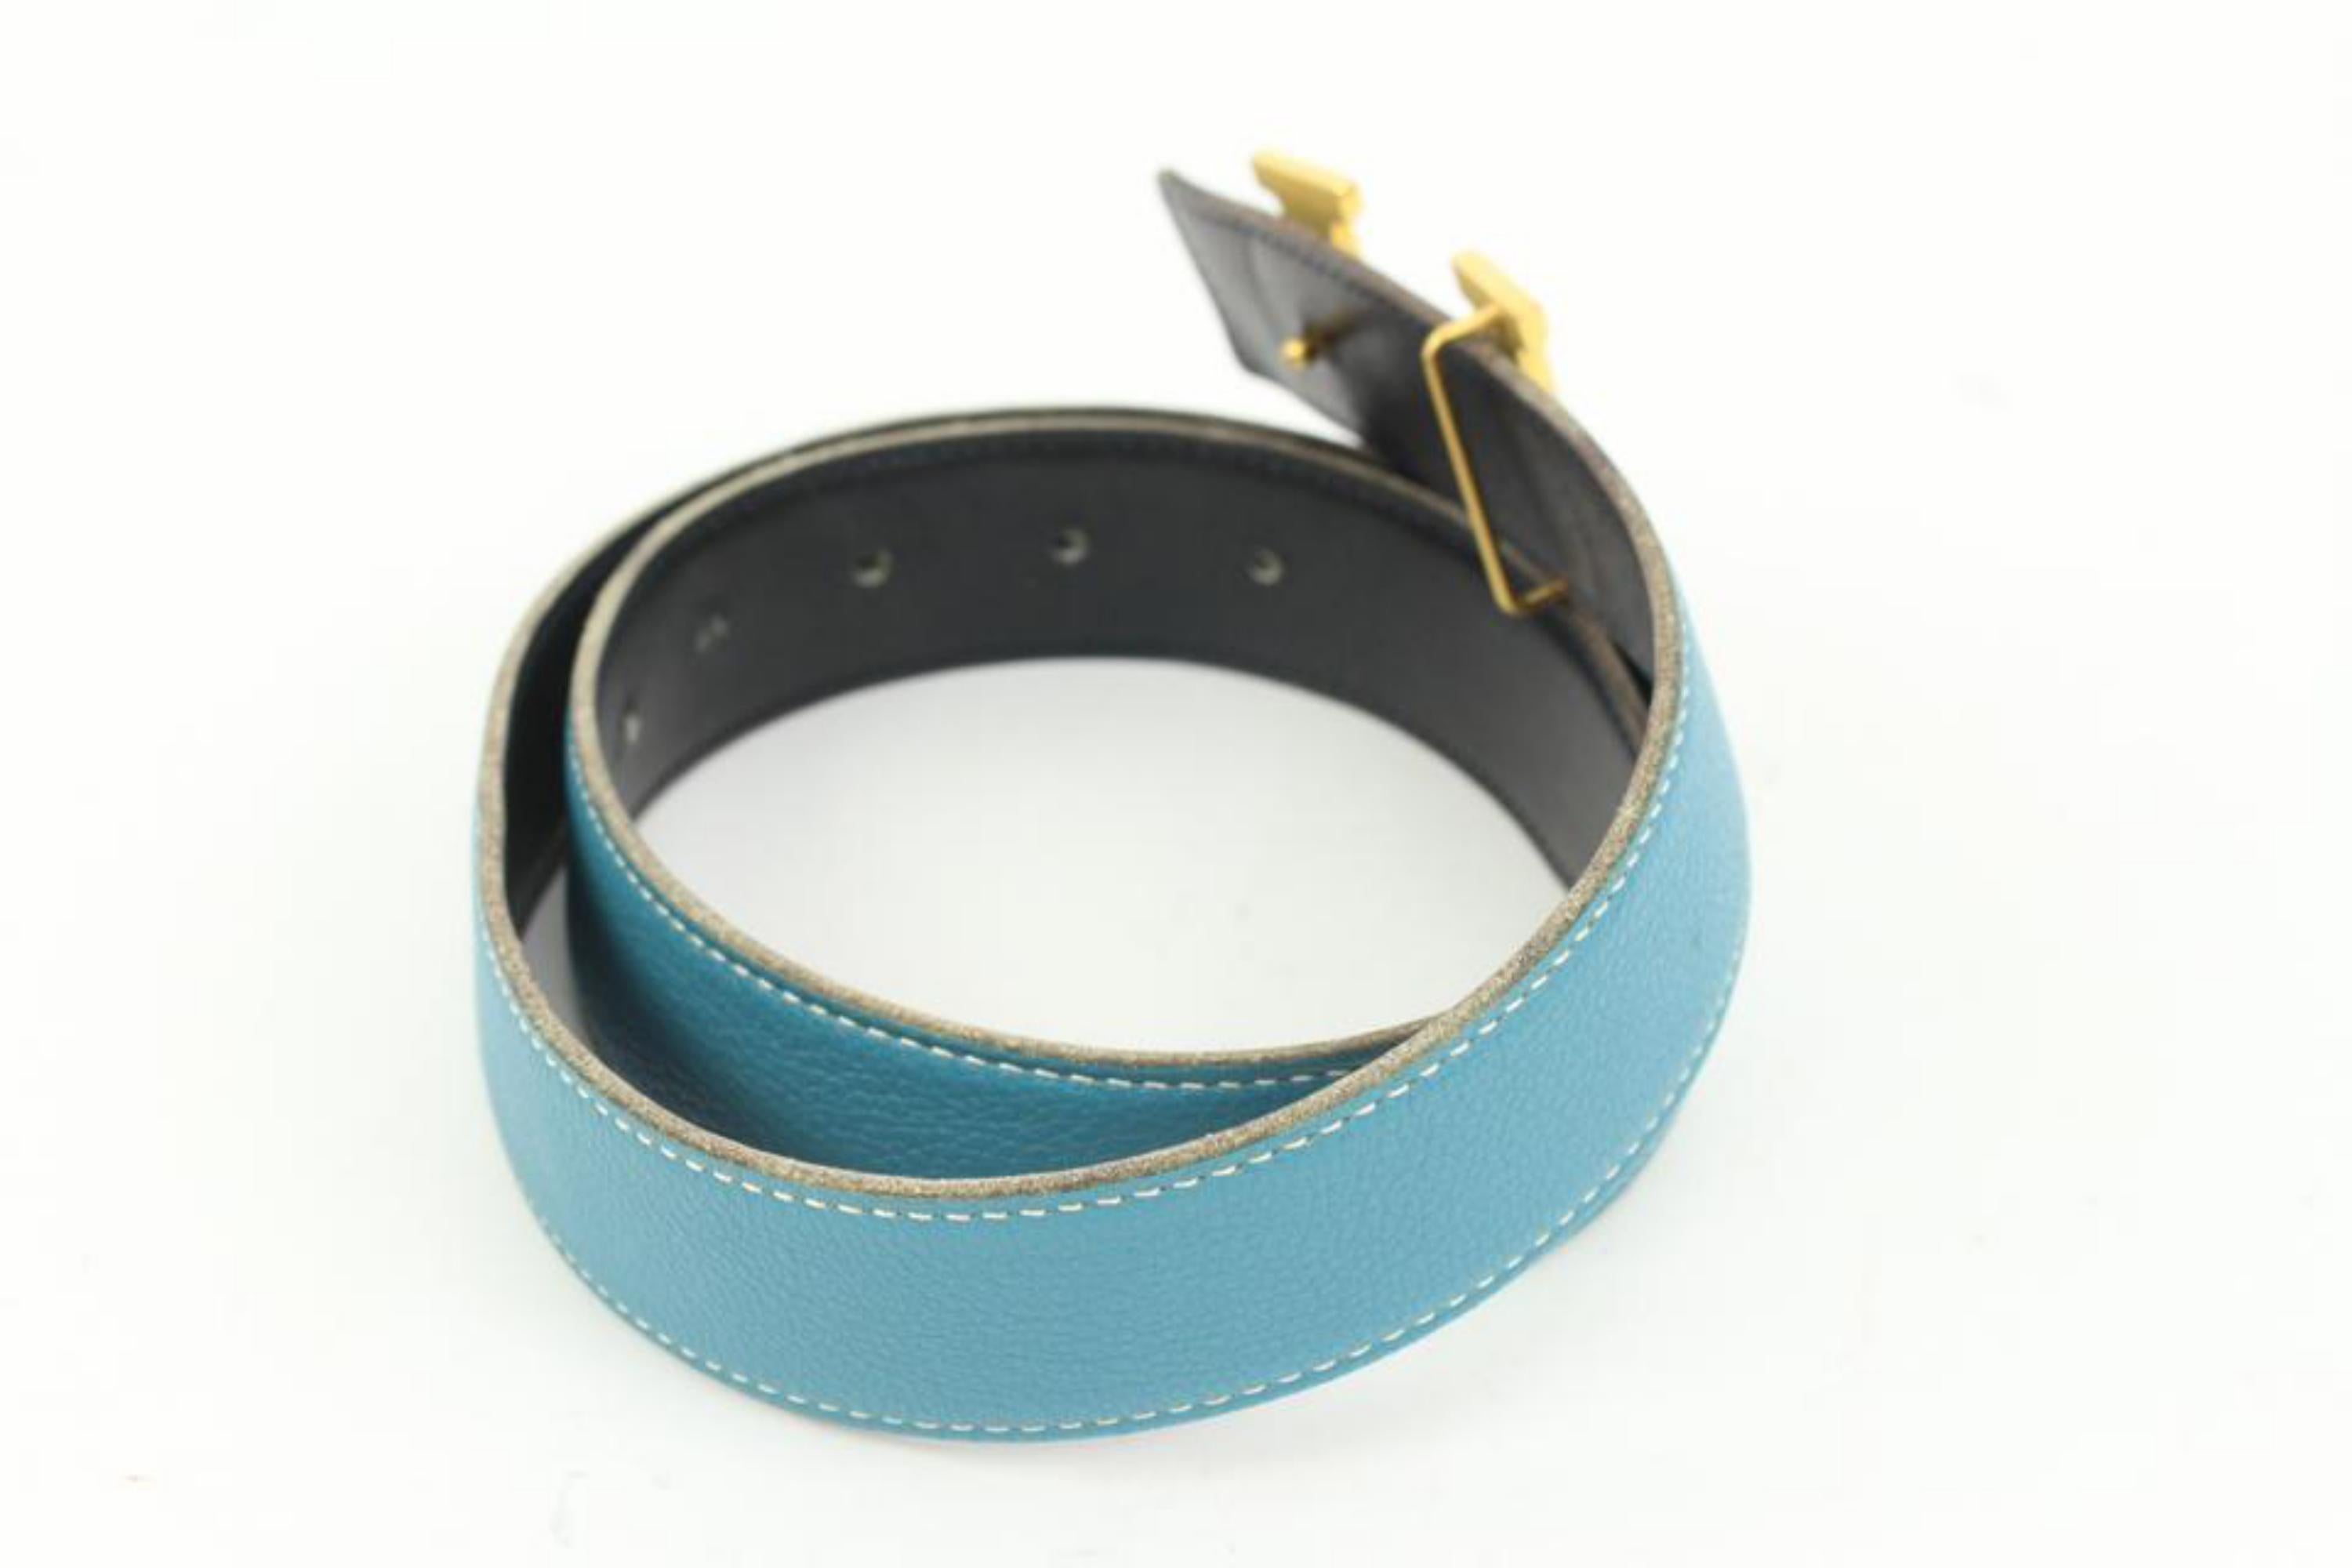 Hermès Black x Blue Jean x Gold 32mm Reversible H Logo Belt Kit 41h55 In Good Condition For Sale In Dix hills, NY